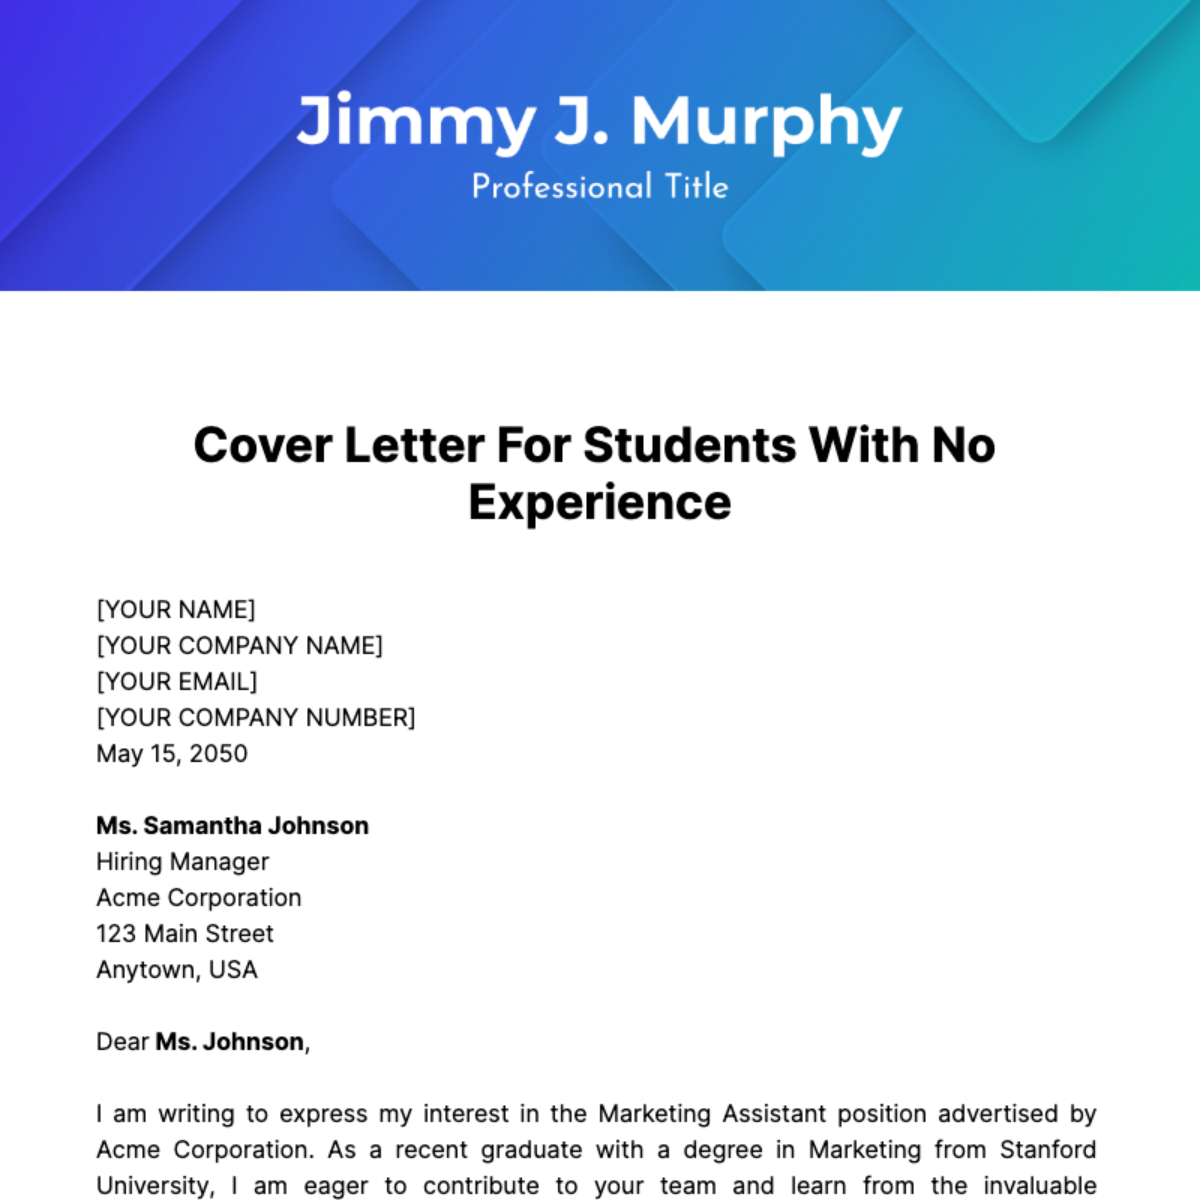 Cover Letter For Students With No Experience Template